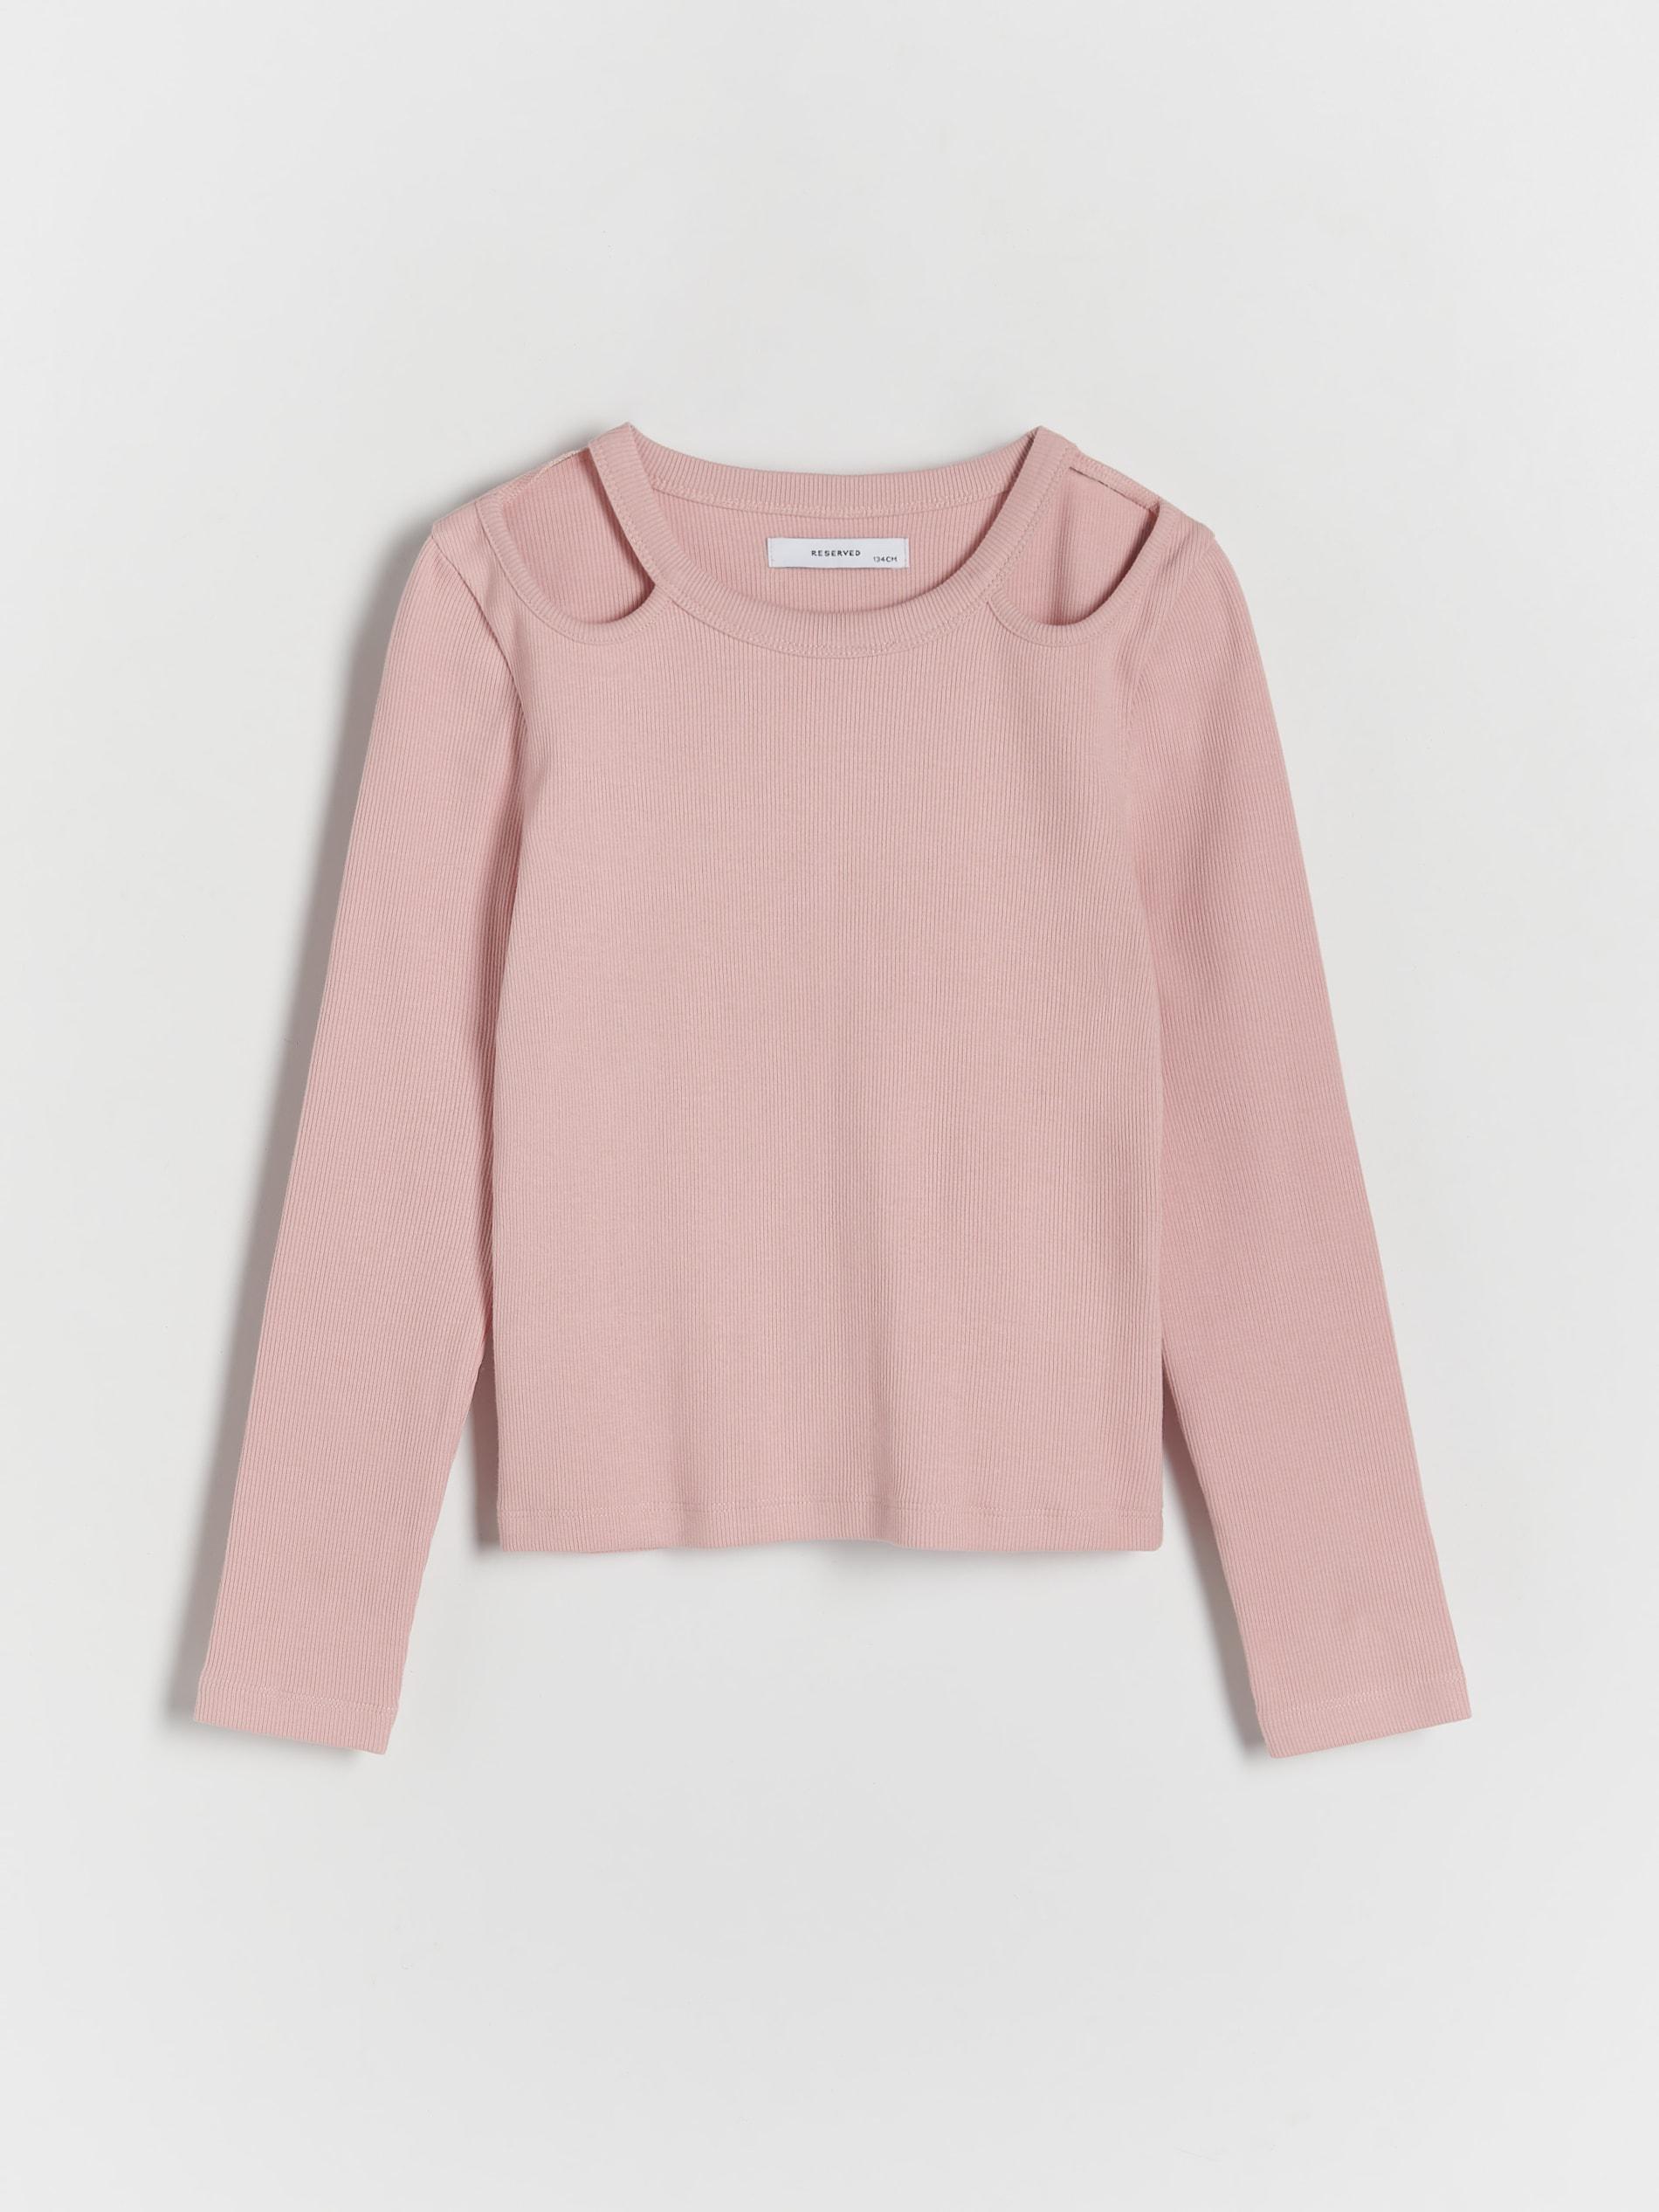 Reserved - Pink Shirt With Open Shoulders, Kids Girls